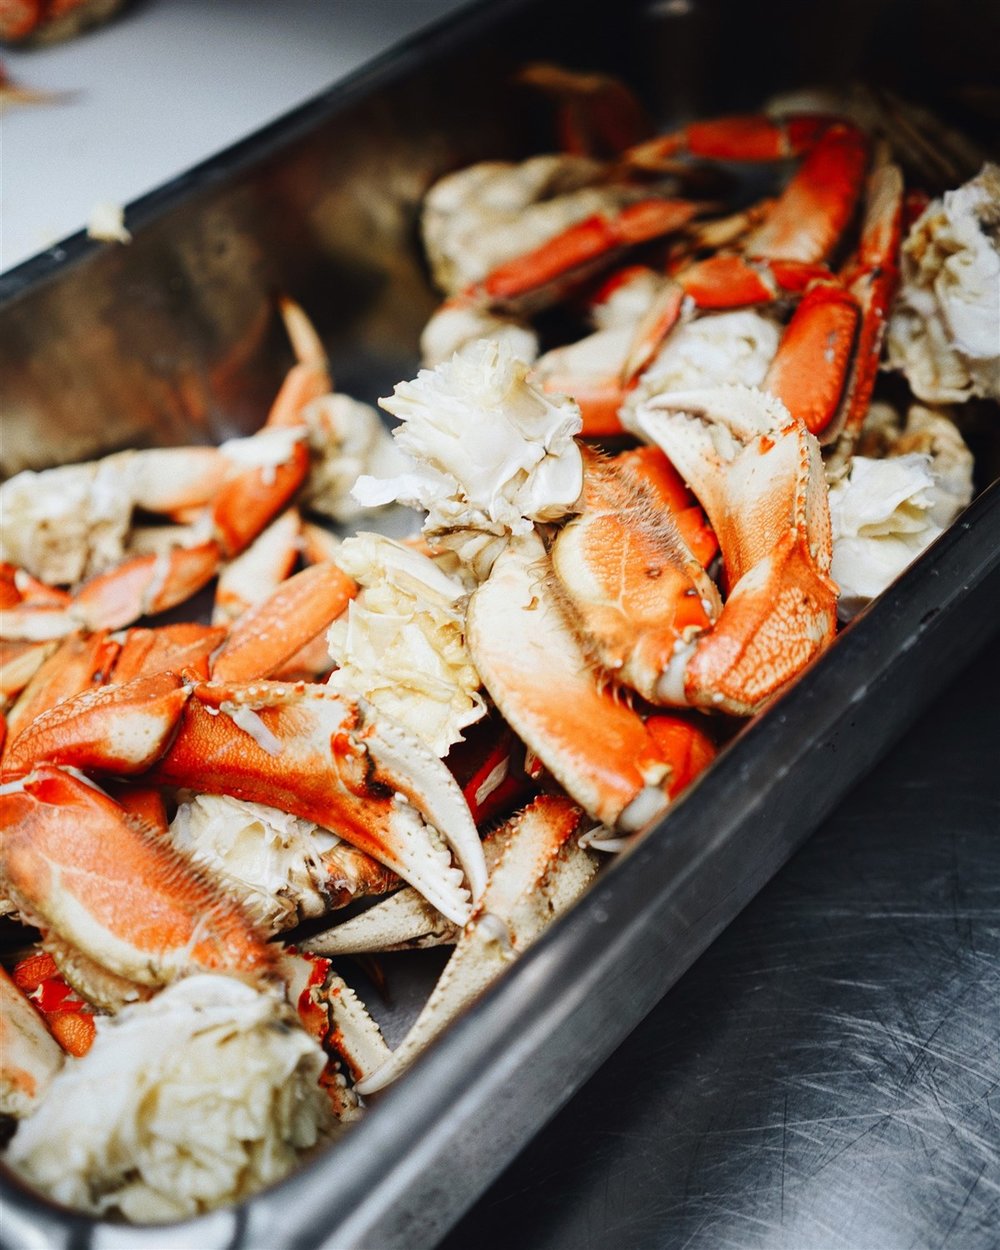  Premium crab, lobster and other select seafoods are regular features on the top fine dining menus in South Lake Tahoe and Stateline.   Marie France Latour    |    Unsplash   